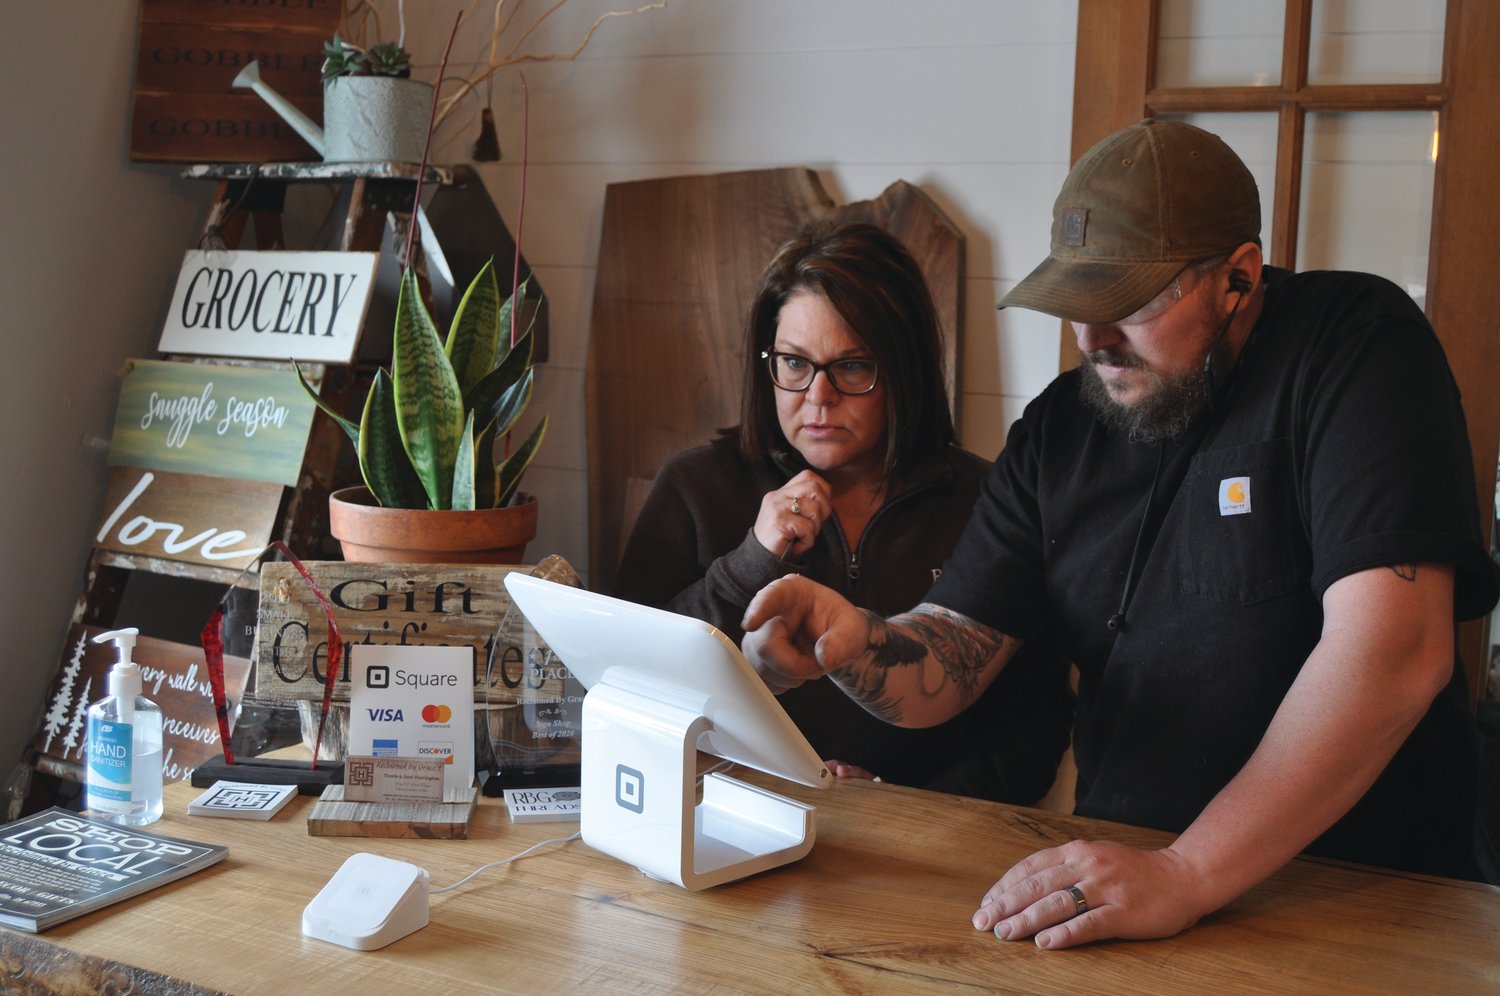 Travis Harrington, right, and Jami Harrington, owners of Reclaimed by Grace, use a Square device at the store Tuesday. Fusion 54 is seeking funding for an entrepreneur program and small business development and support.